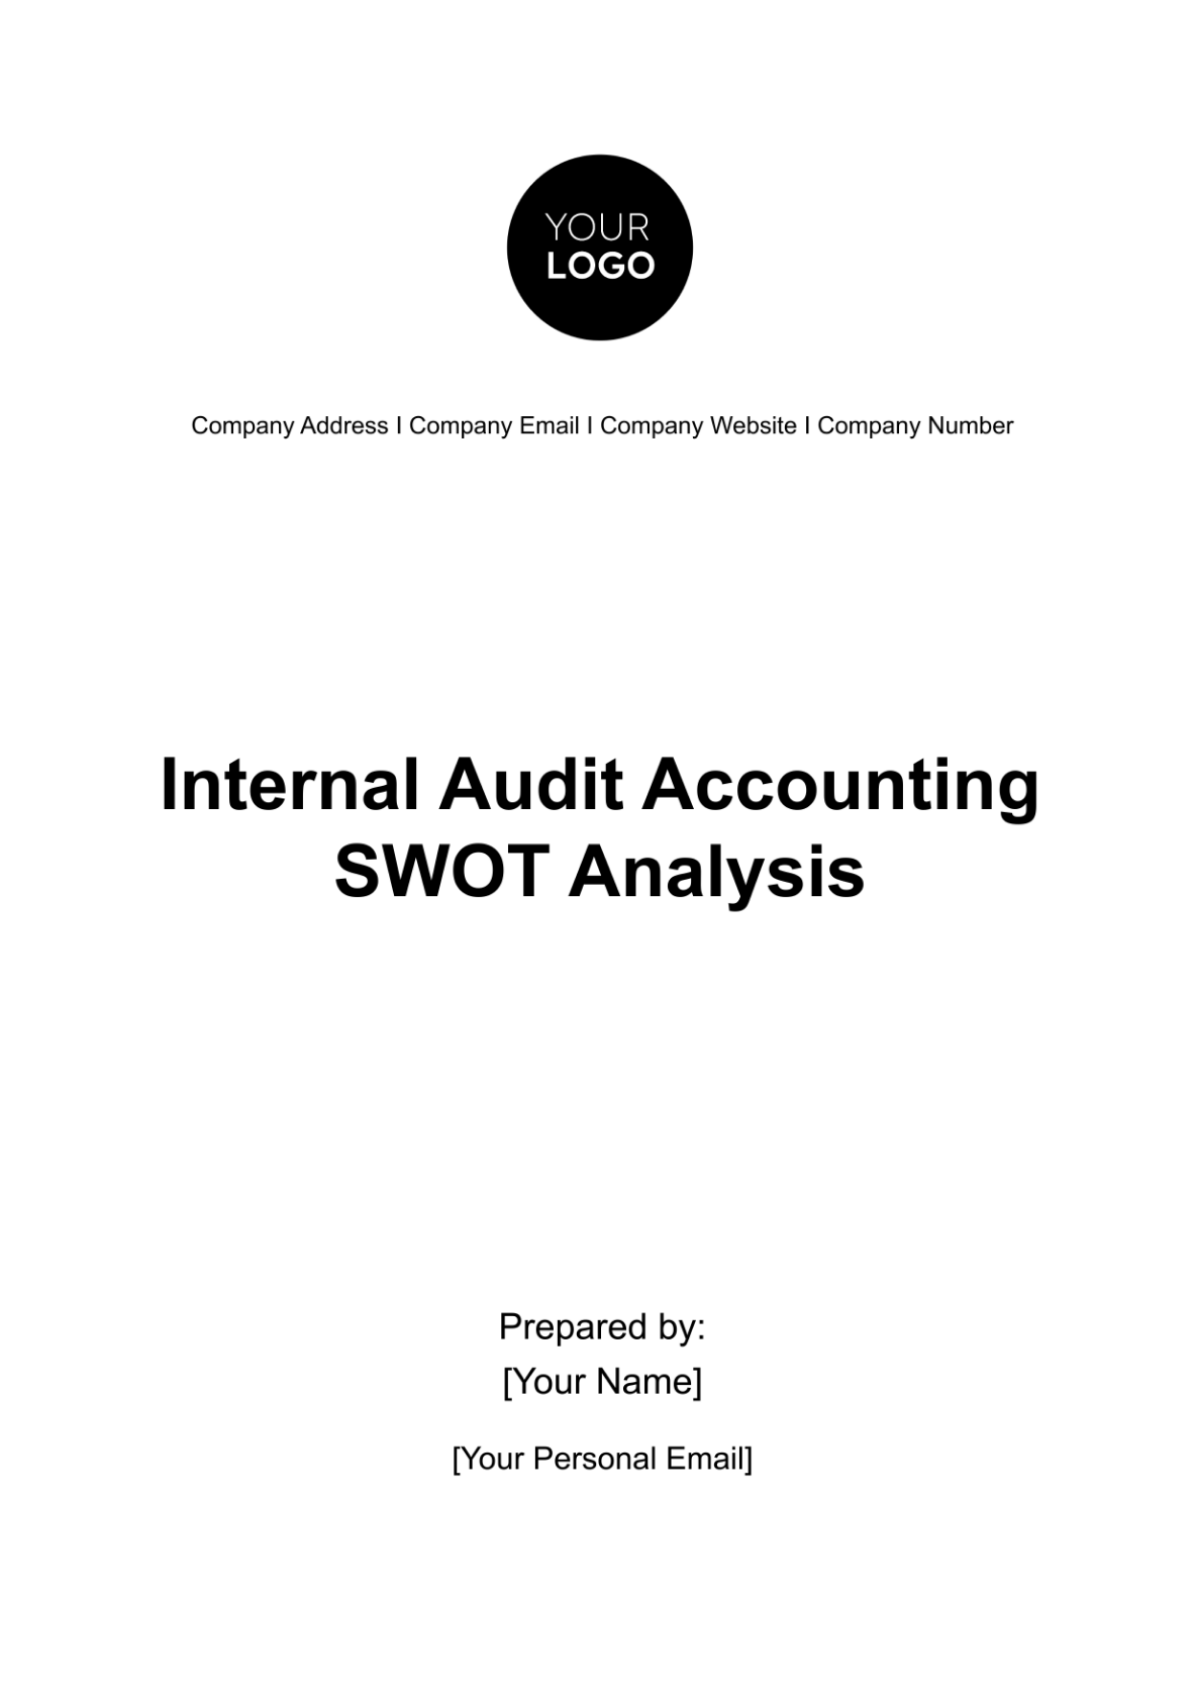 Internal Audit Accounting SWOT Analysis Template